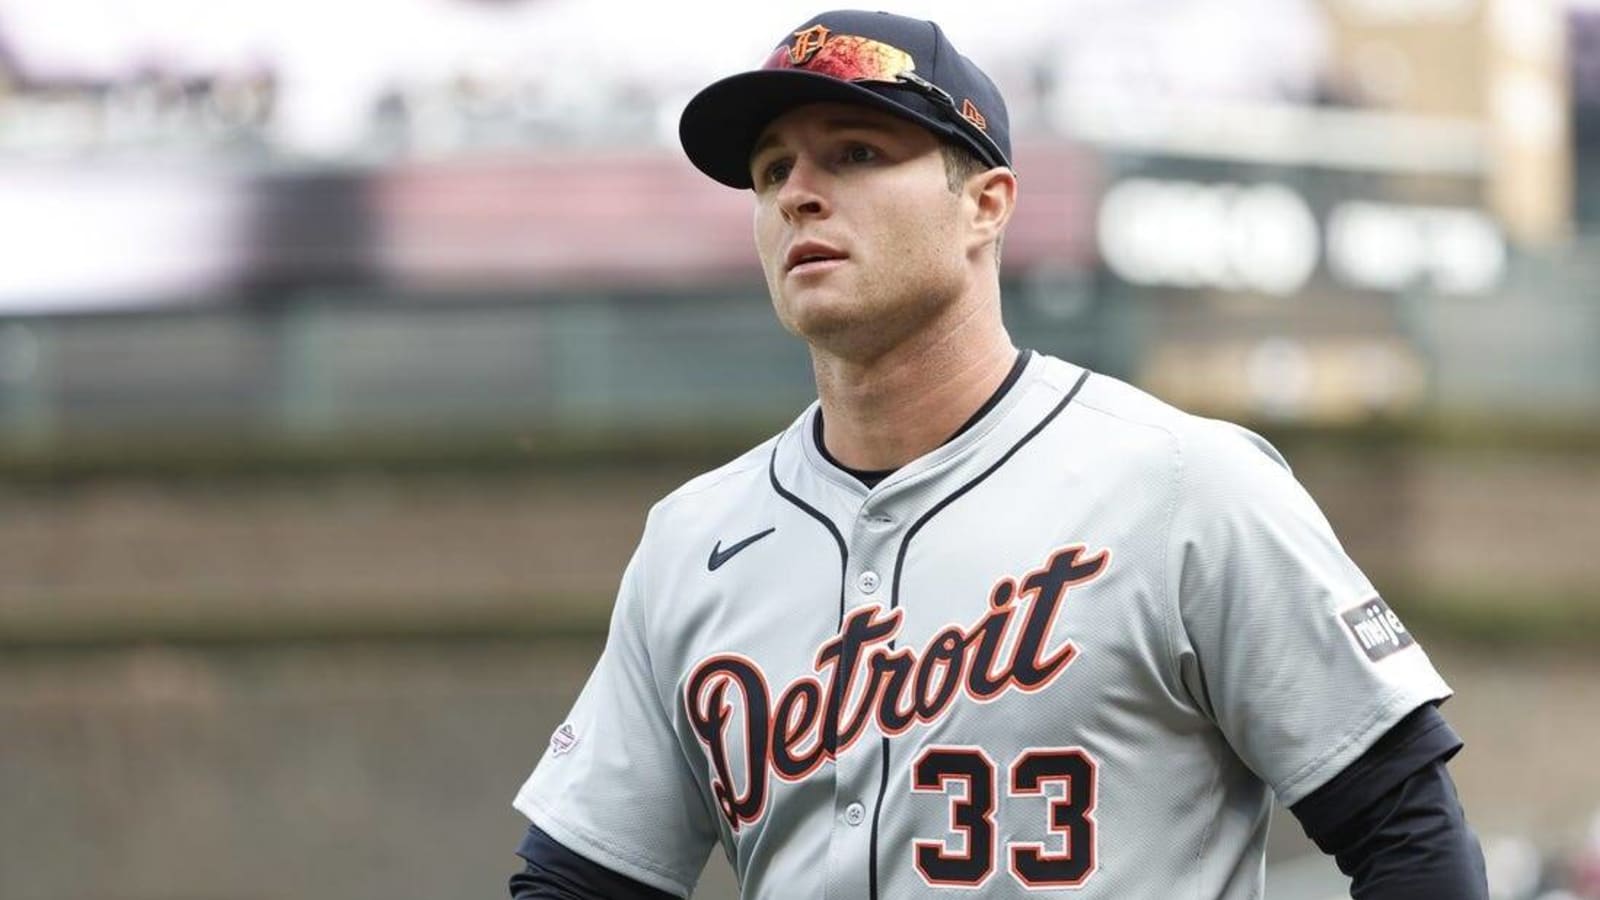 Colt Keith, Tigers chasing additional success vs. White Sox